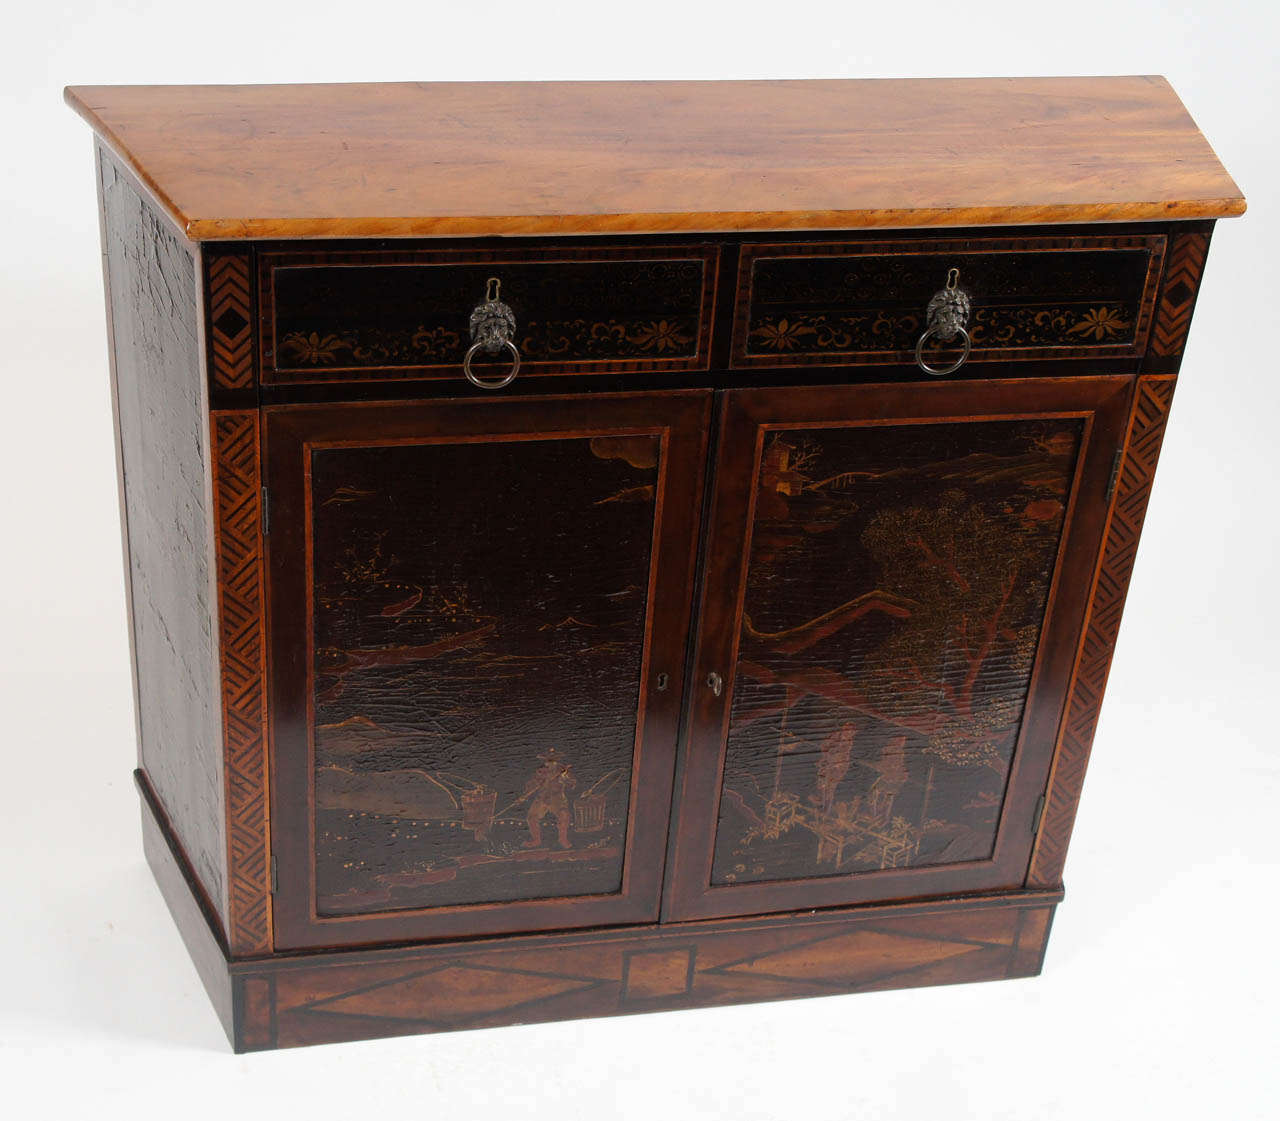 British English Regency Chinoiserie Lacquer Console Cabinet, c. 1805